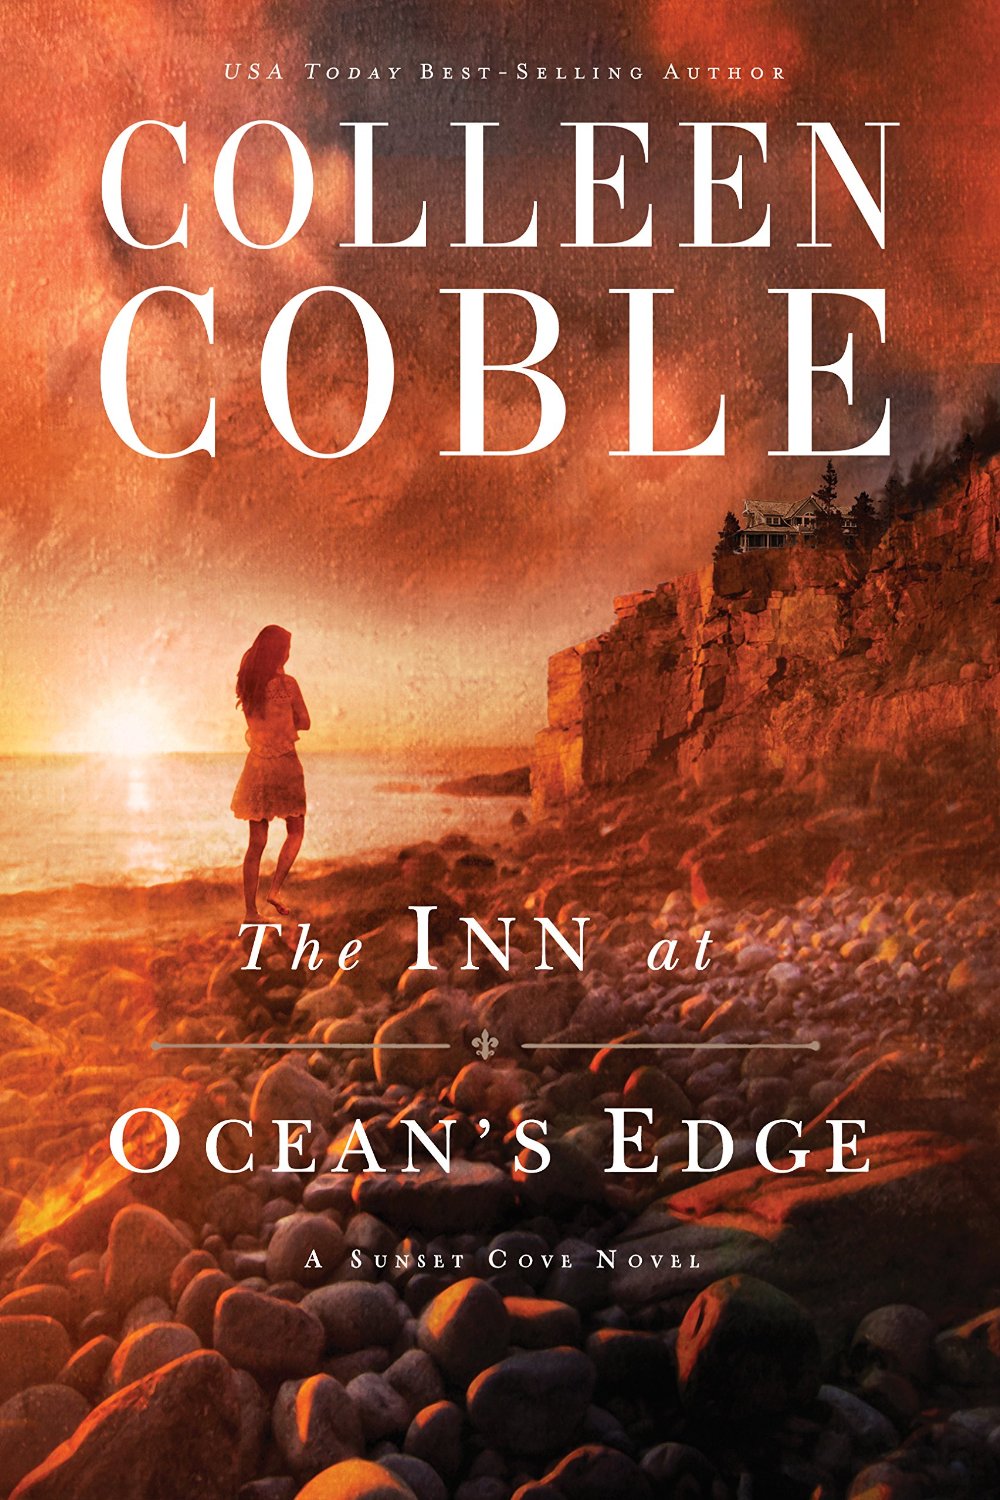 Book Review: The Inn at Ocean’s Edge by Colleen Coble